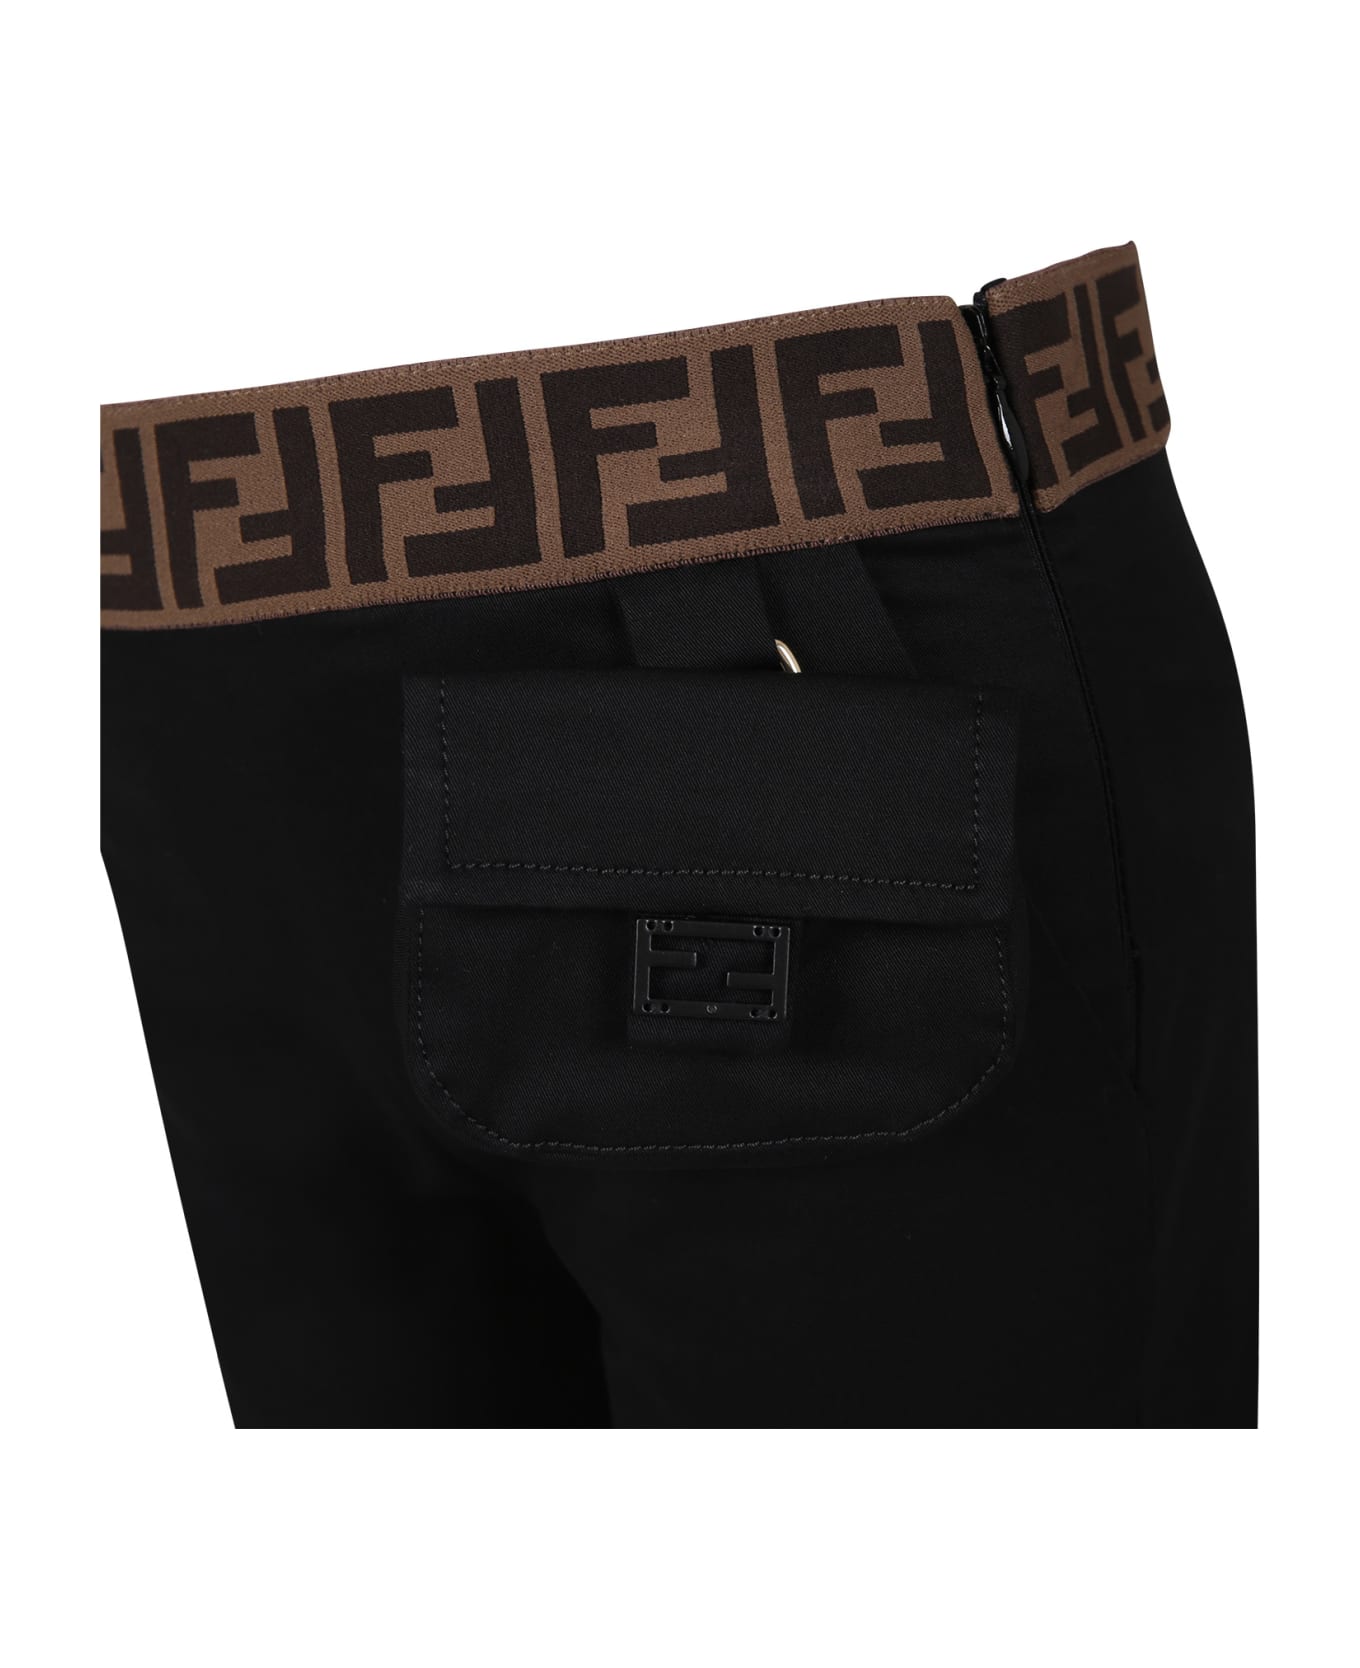 Fendi Black Trousers Fro Girl With Ff - Black